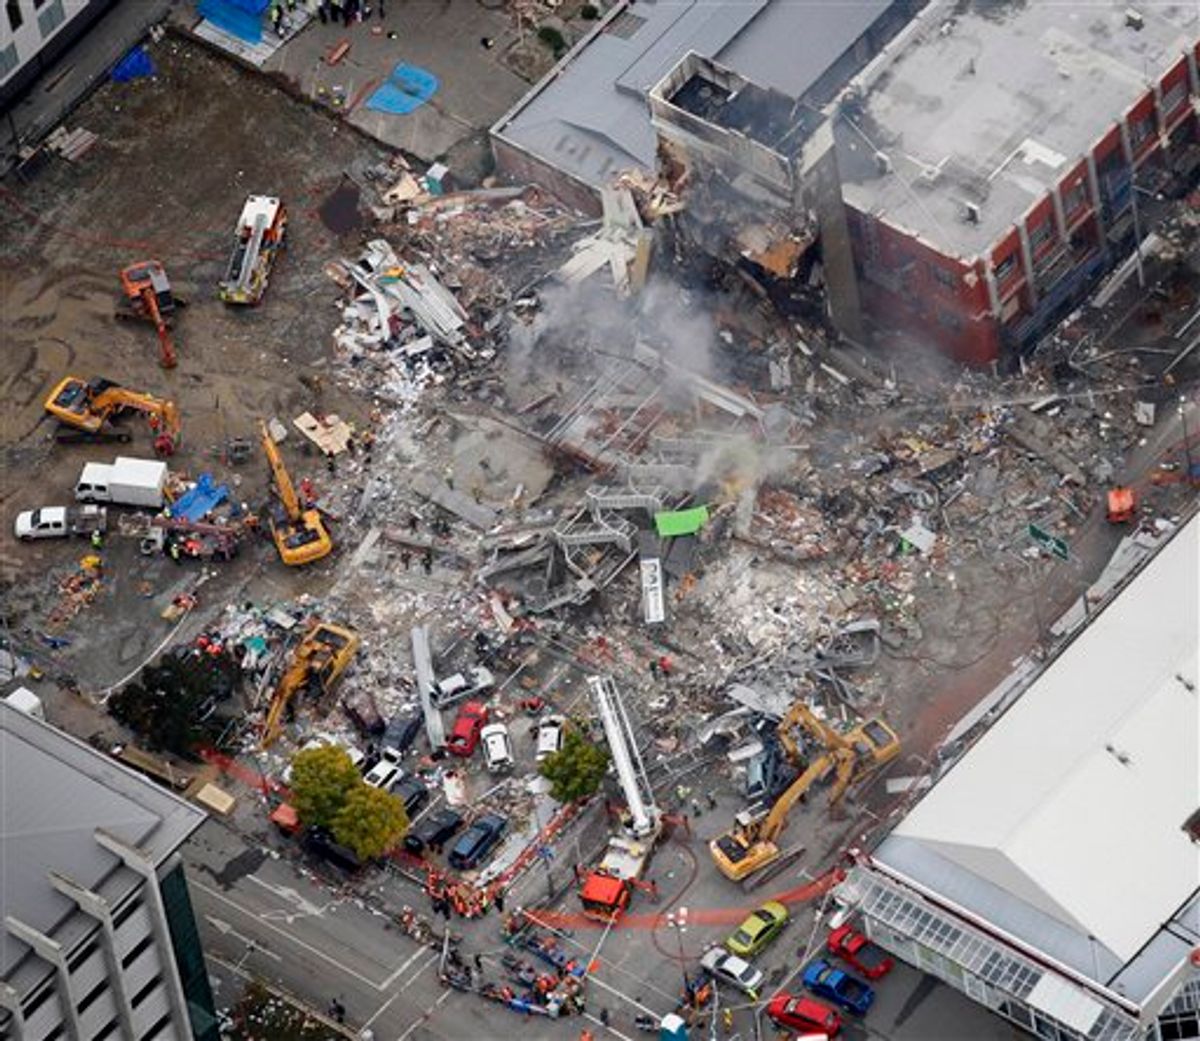 An aerial view of emergency services people working at the ruined CTV building in central in Christchurch, New Zealand, Wednesday, Feb. 23, 2011. Search teams used their bare hands, dogs, heavy cranes and earth movers Wednesday to pull survivors from the rubble of Tuesday's powerful earthquake. (AP Photo/Sarah Ivey) AUSTRALIA OUT, NEW ZEALAND OUT  (AP)